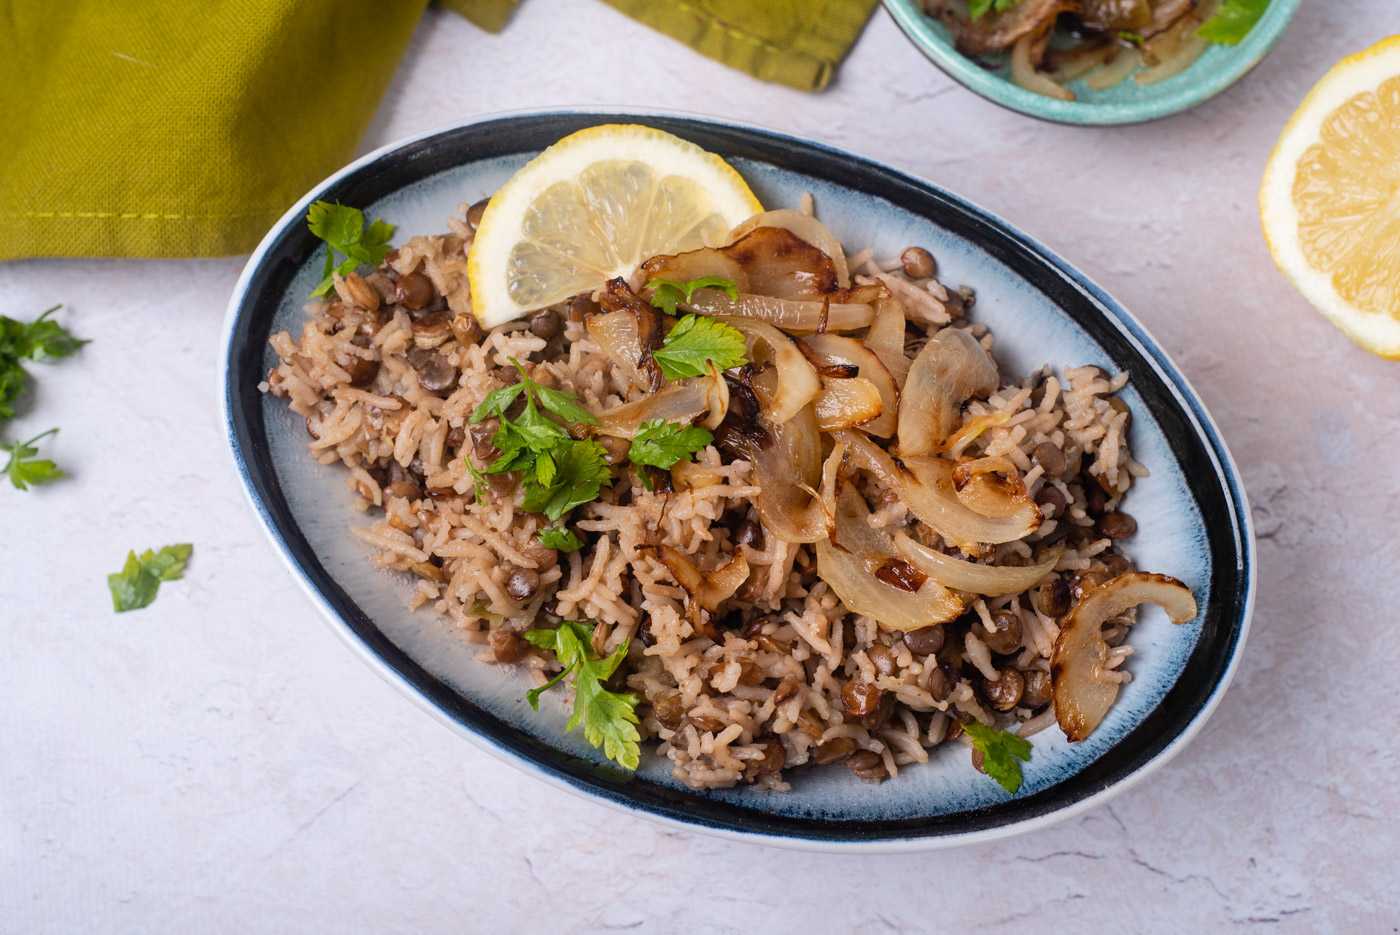 Rice with lentils topped wit caramelized onion, chopped parsley and lemon slice